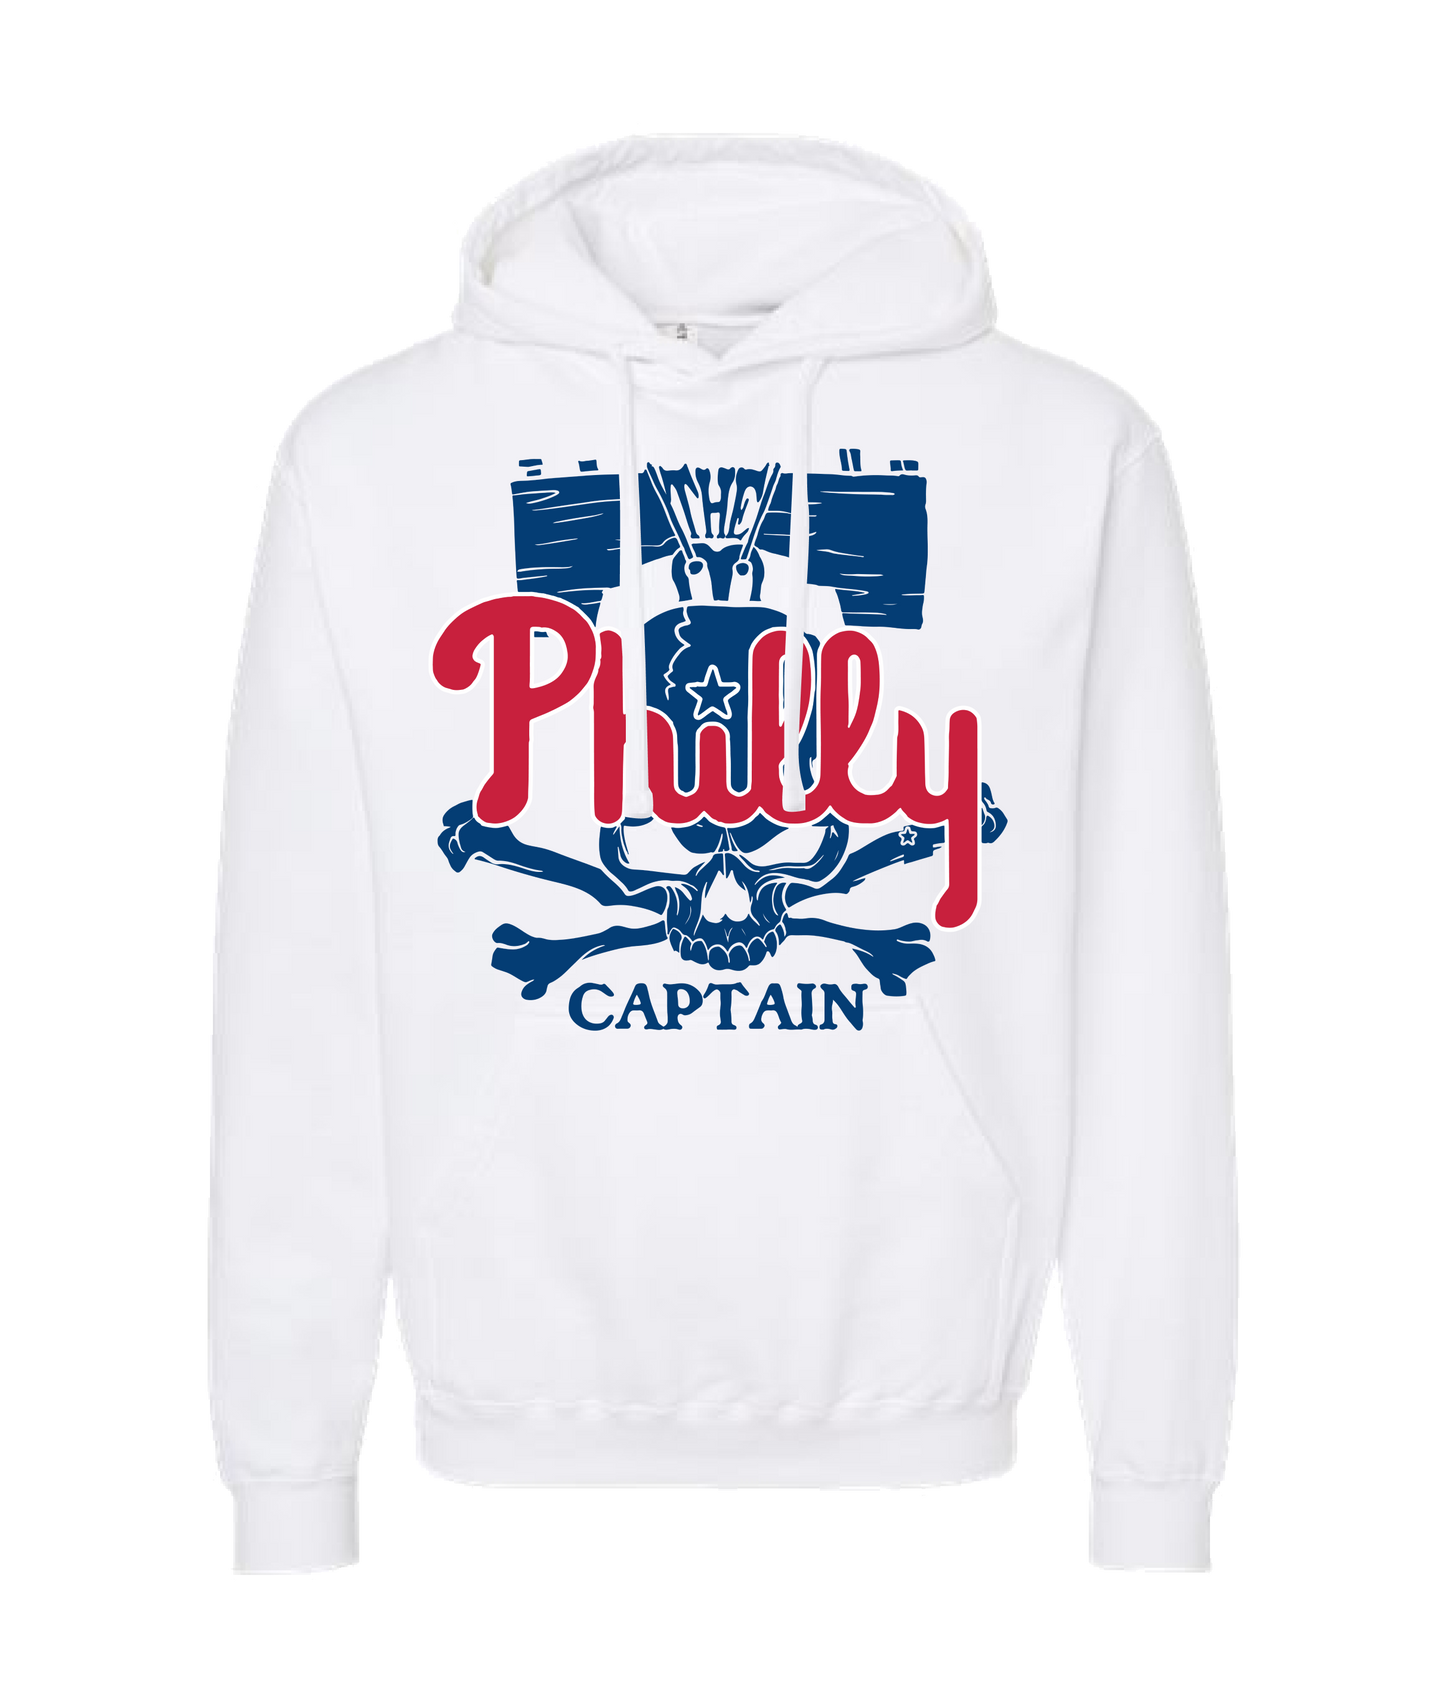 The Philly Captain's Merch is Fire - PHILLY - White Hoodie